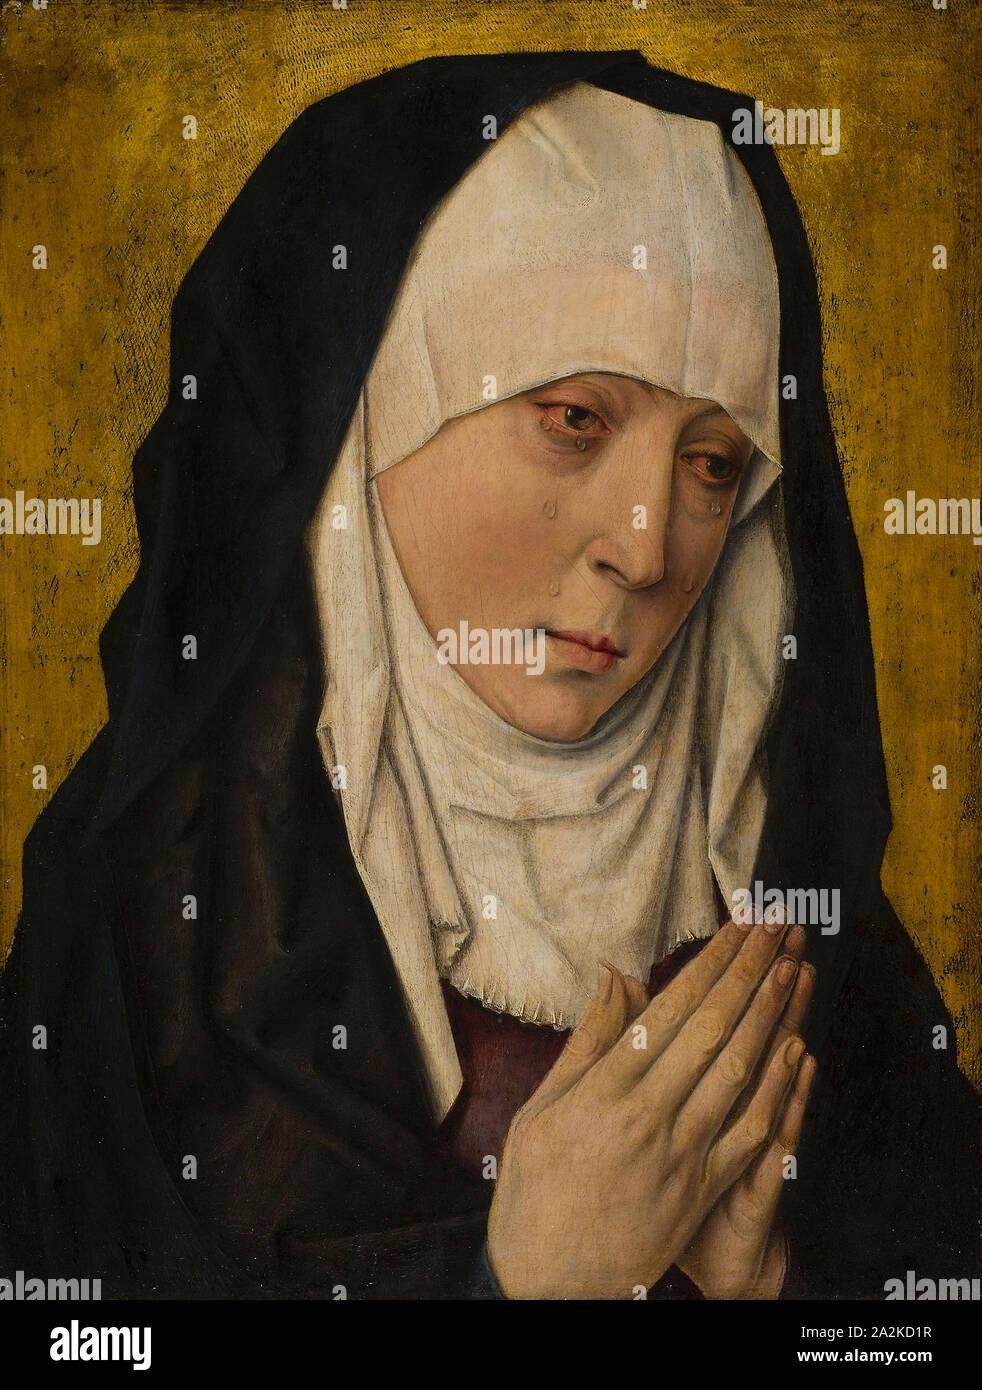 Mater Dolorosa (Sorrowing Virgin), 1480/1500, Workshop of Dieric Bouts, Netherlandish, c. 1410–1475, Netherlands, Oil on panel, 38.7 × 30.3 cm (15 1/4 × 11 7/8 in.), painted surface: 37.2 × 29 cm (14 7/8 × 11 3/8 in Stock Photo